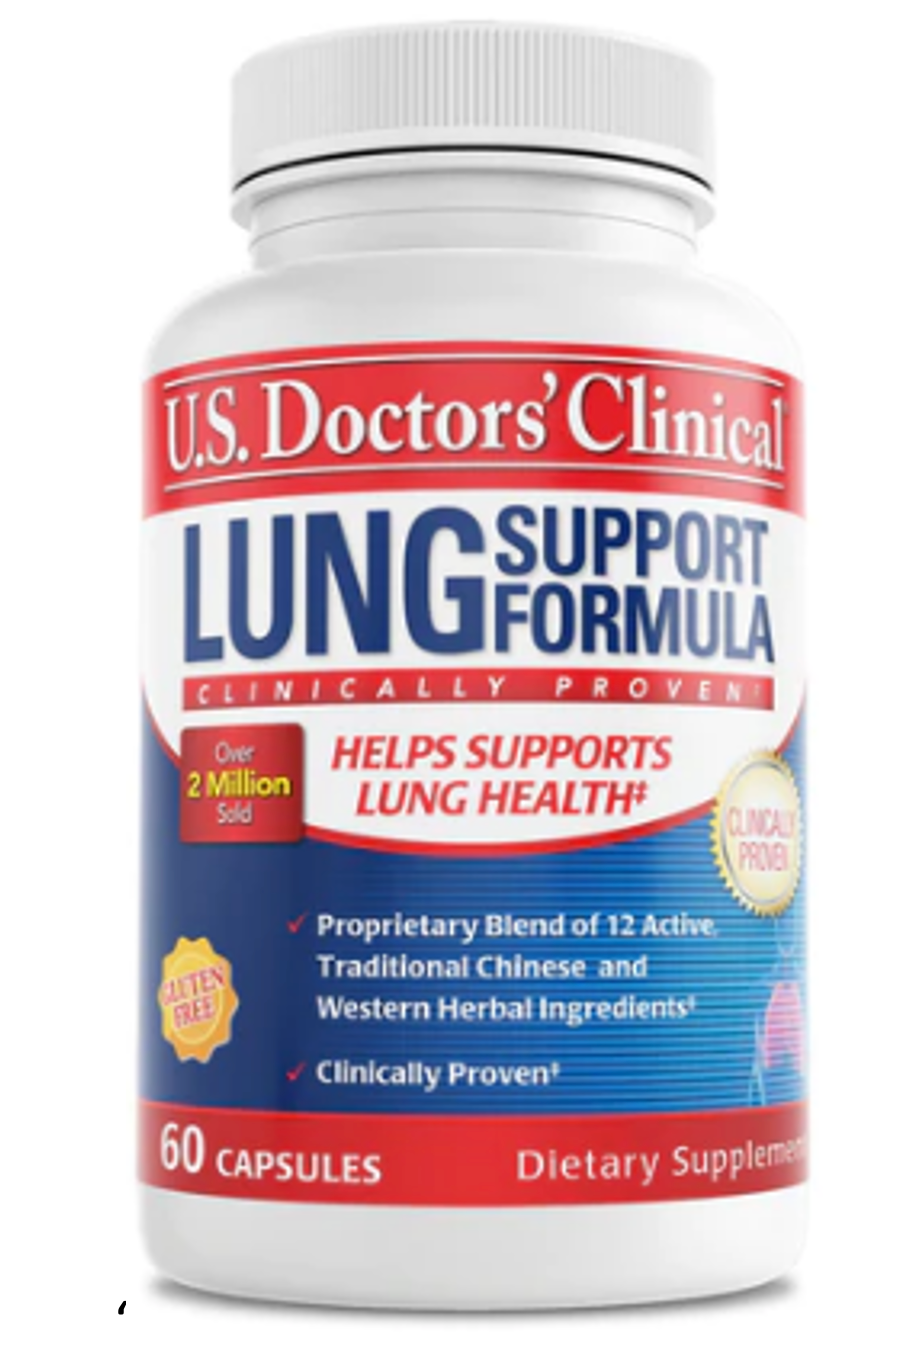 Daily OTC Pearl: Lung Support Formula